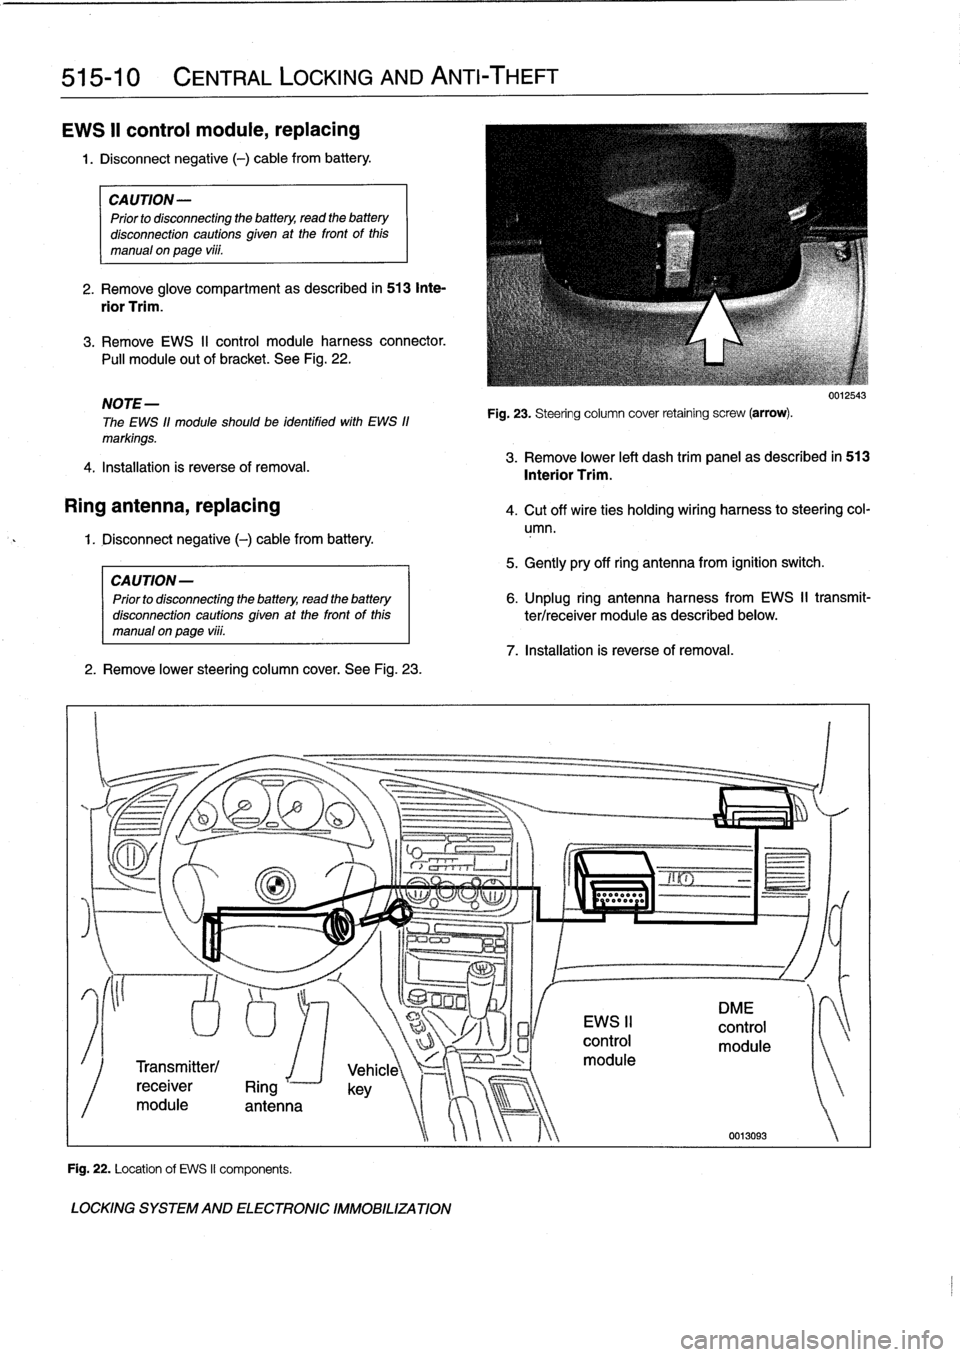 BMW 323i 1993 E36 Workshop Manual 
515-10

	

CENTRAL
LOCKING
AND
ANTI-THEFT

EWS
II
control
module,
replacing

1
.
Disconnect
negative
(-)
cable
from
battery
.

CAUTION-

Prior
to
disconnecting
the
battery,
read
the
battery

disconne